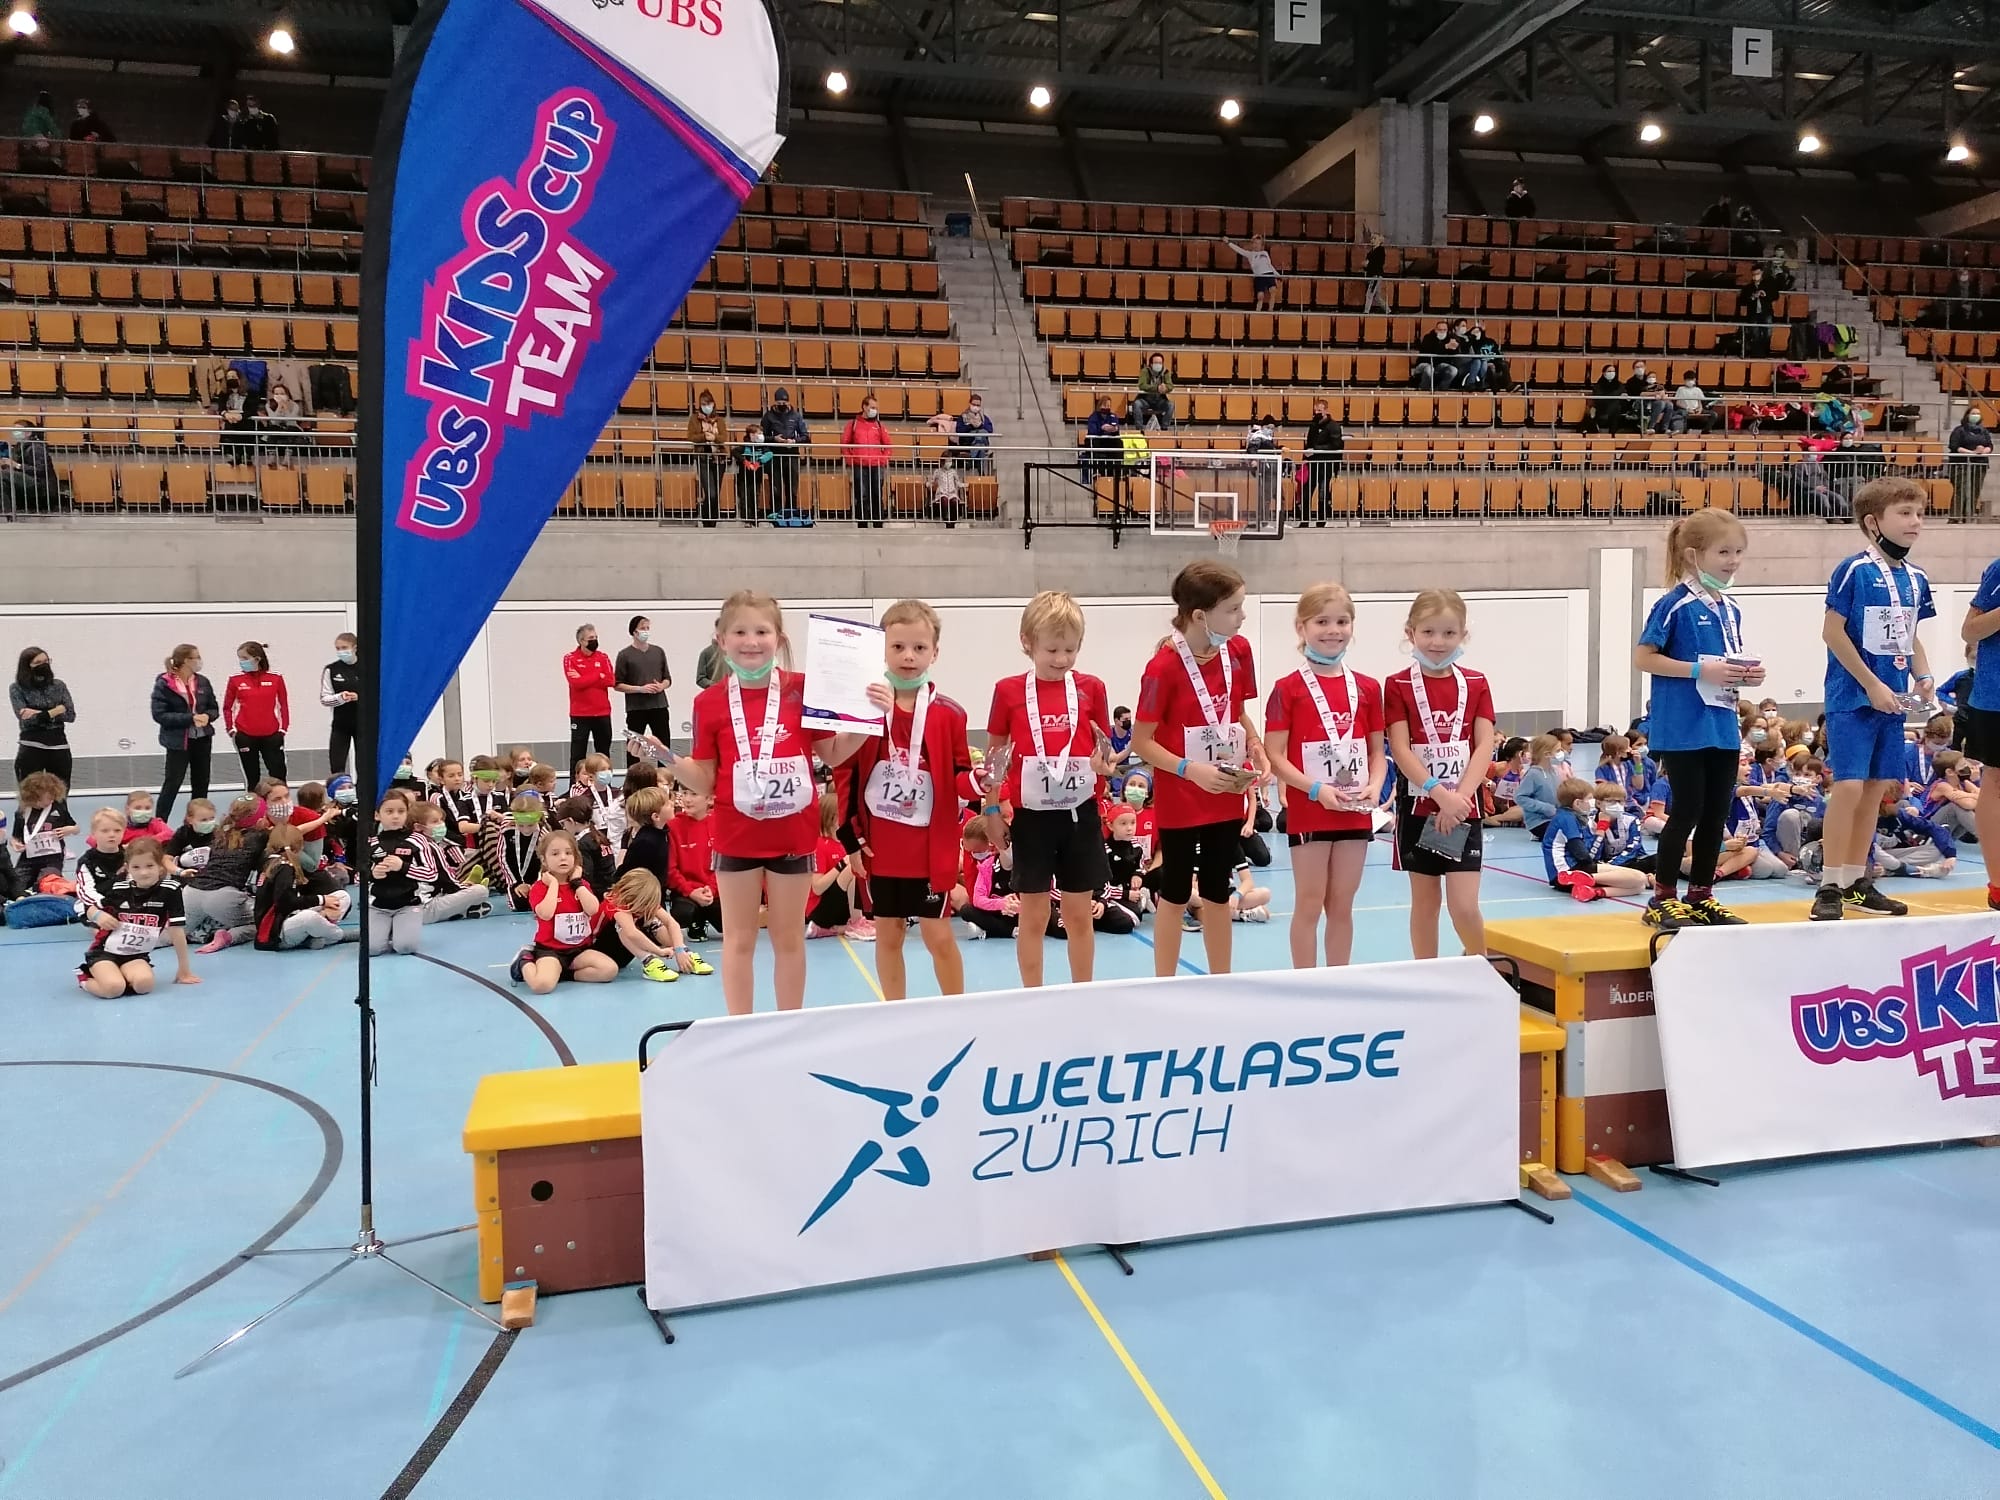 You are currently viewing Bericht UBS Kids Cup Teams, Bern-Wankdorf